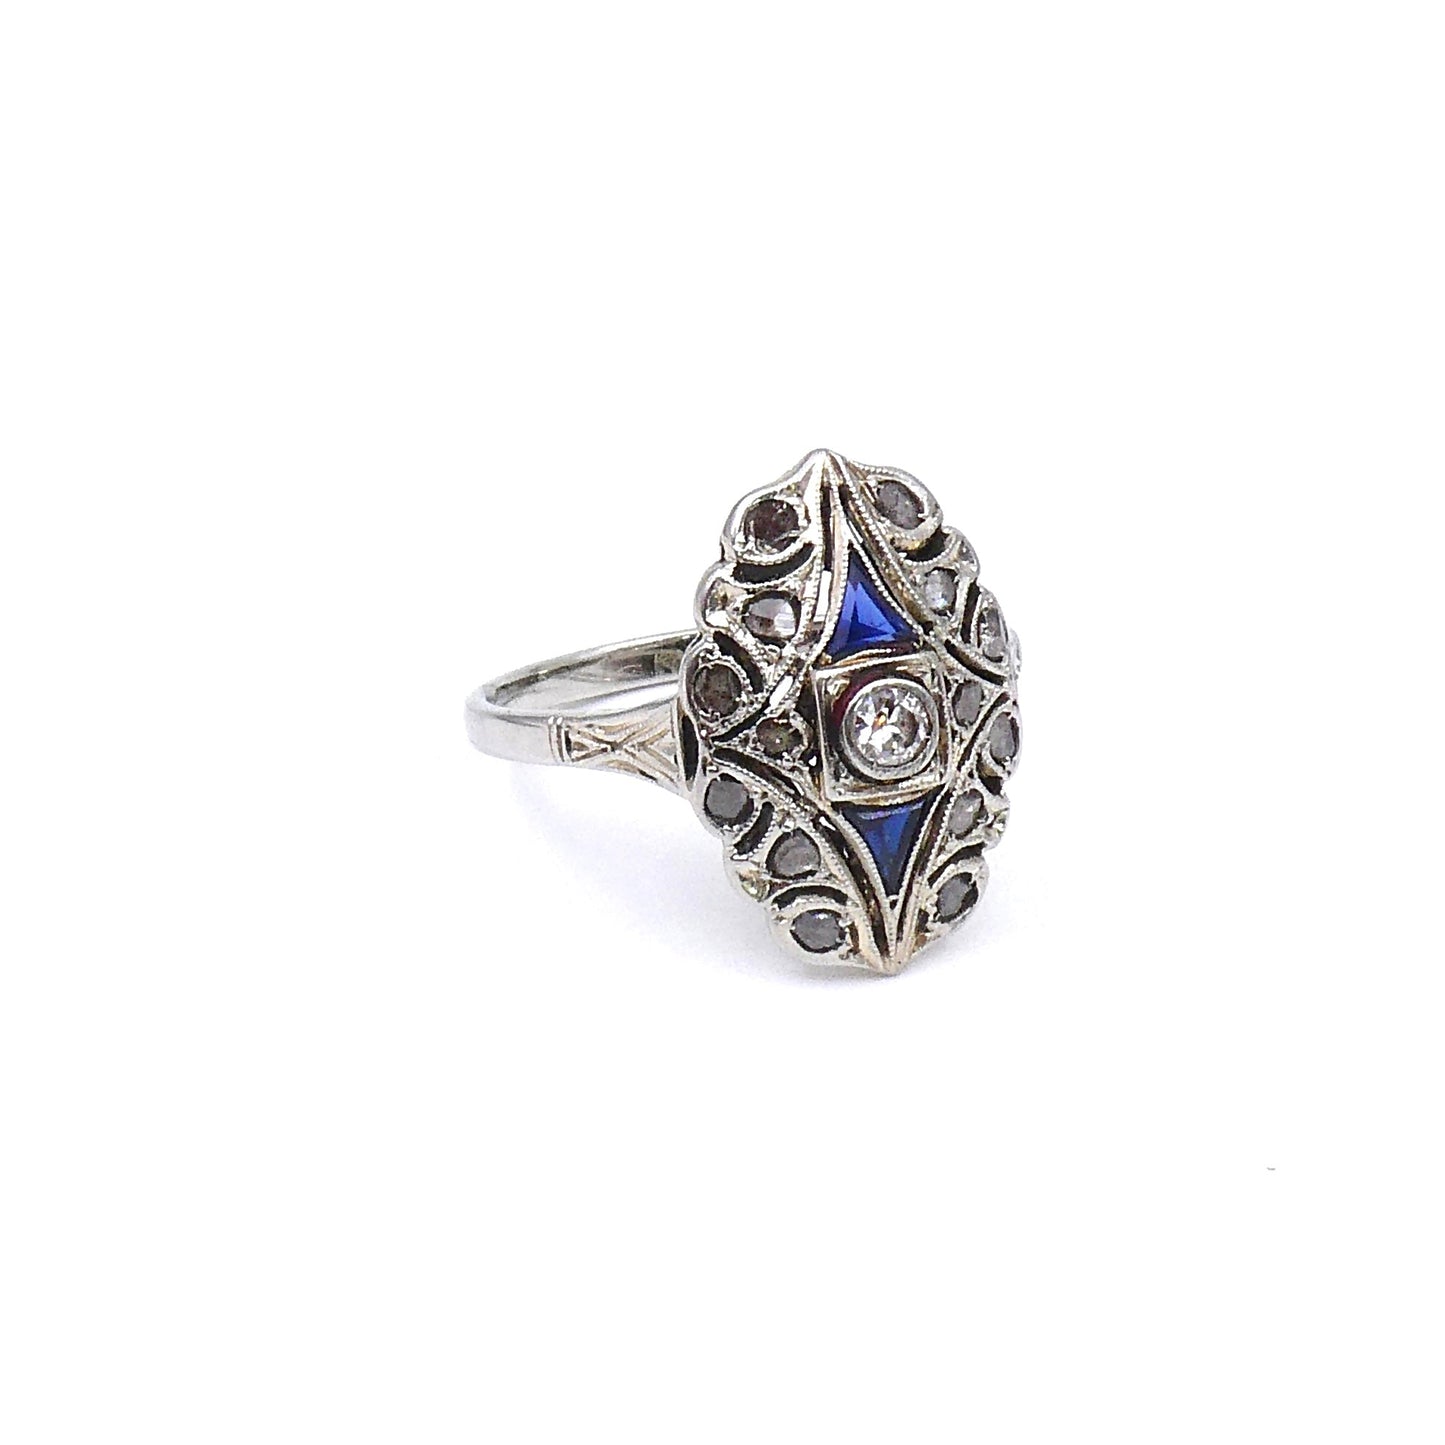 Vintage Sapphire ring with diamonds, an Art Deco style sapphire ring. - Collected